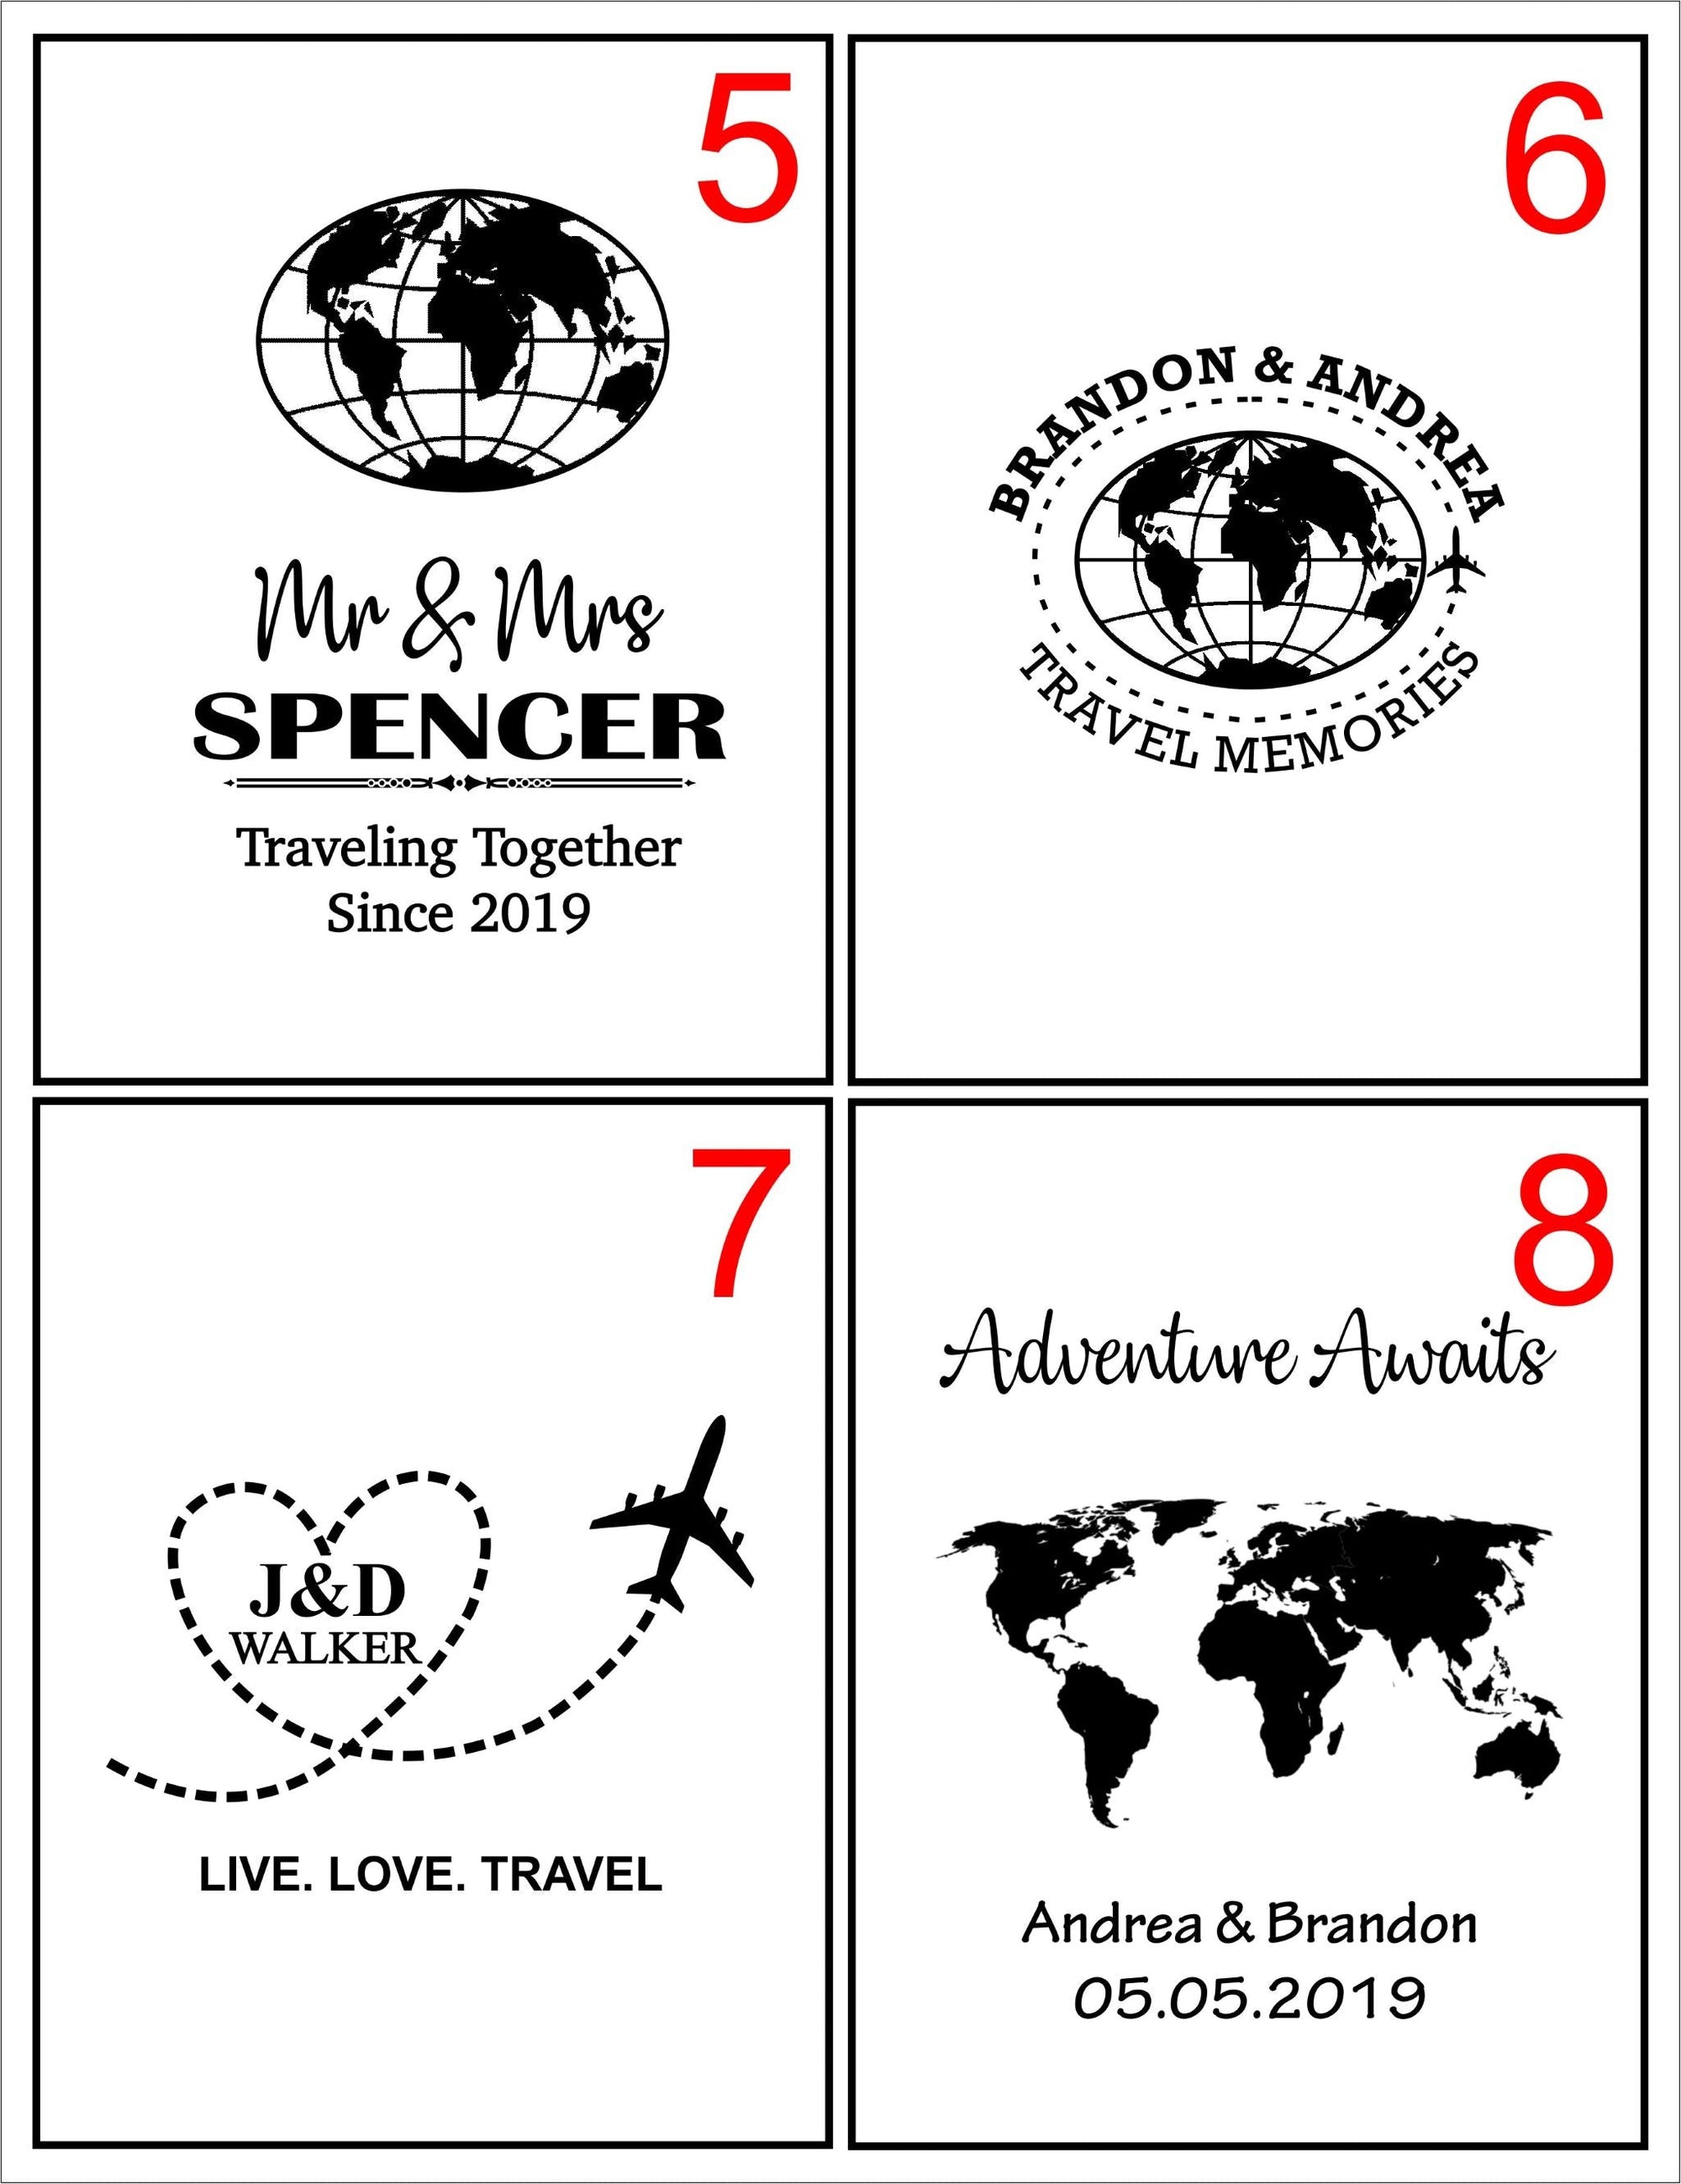 Mr. and Mrs. Personalized Passport Covers and Luggage Tags